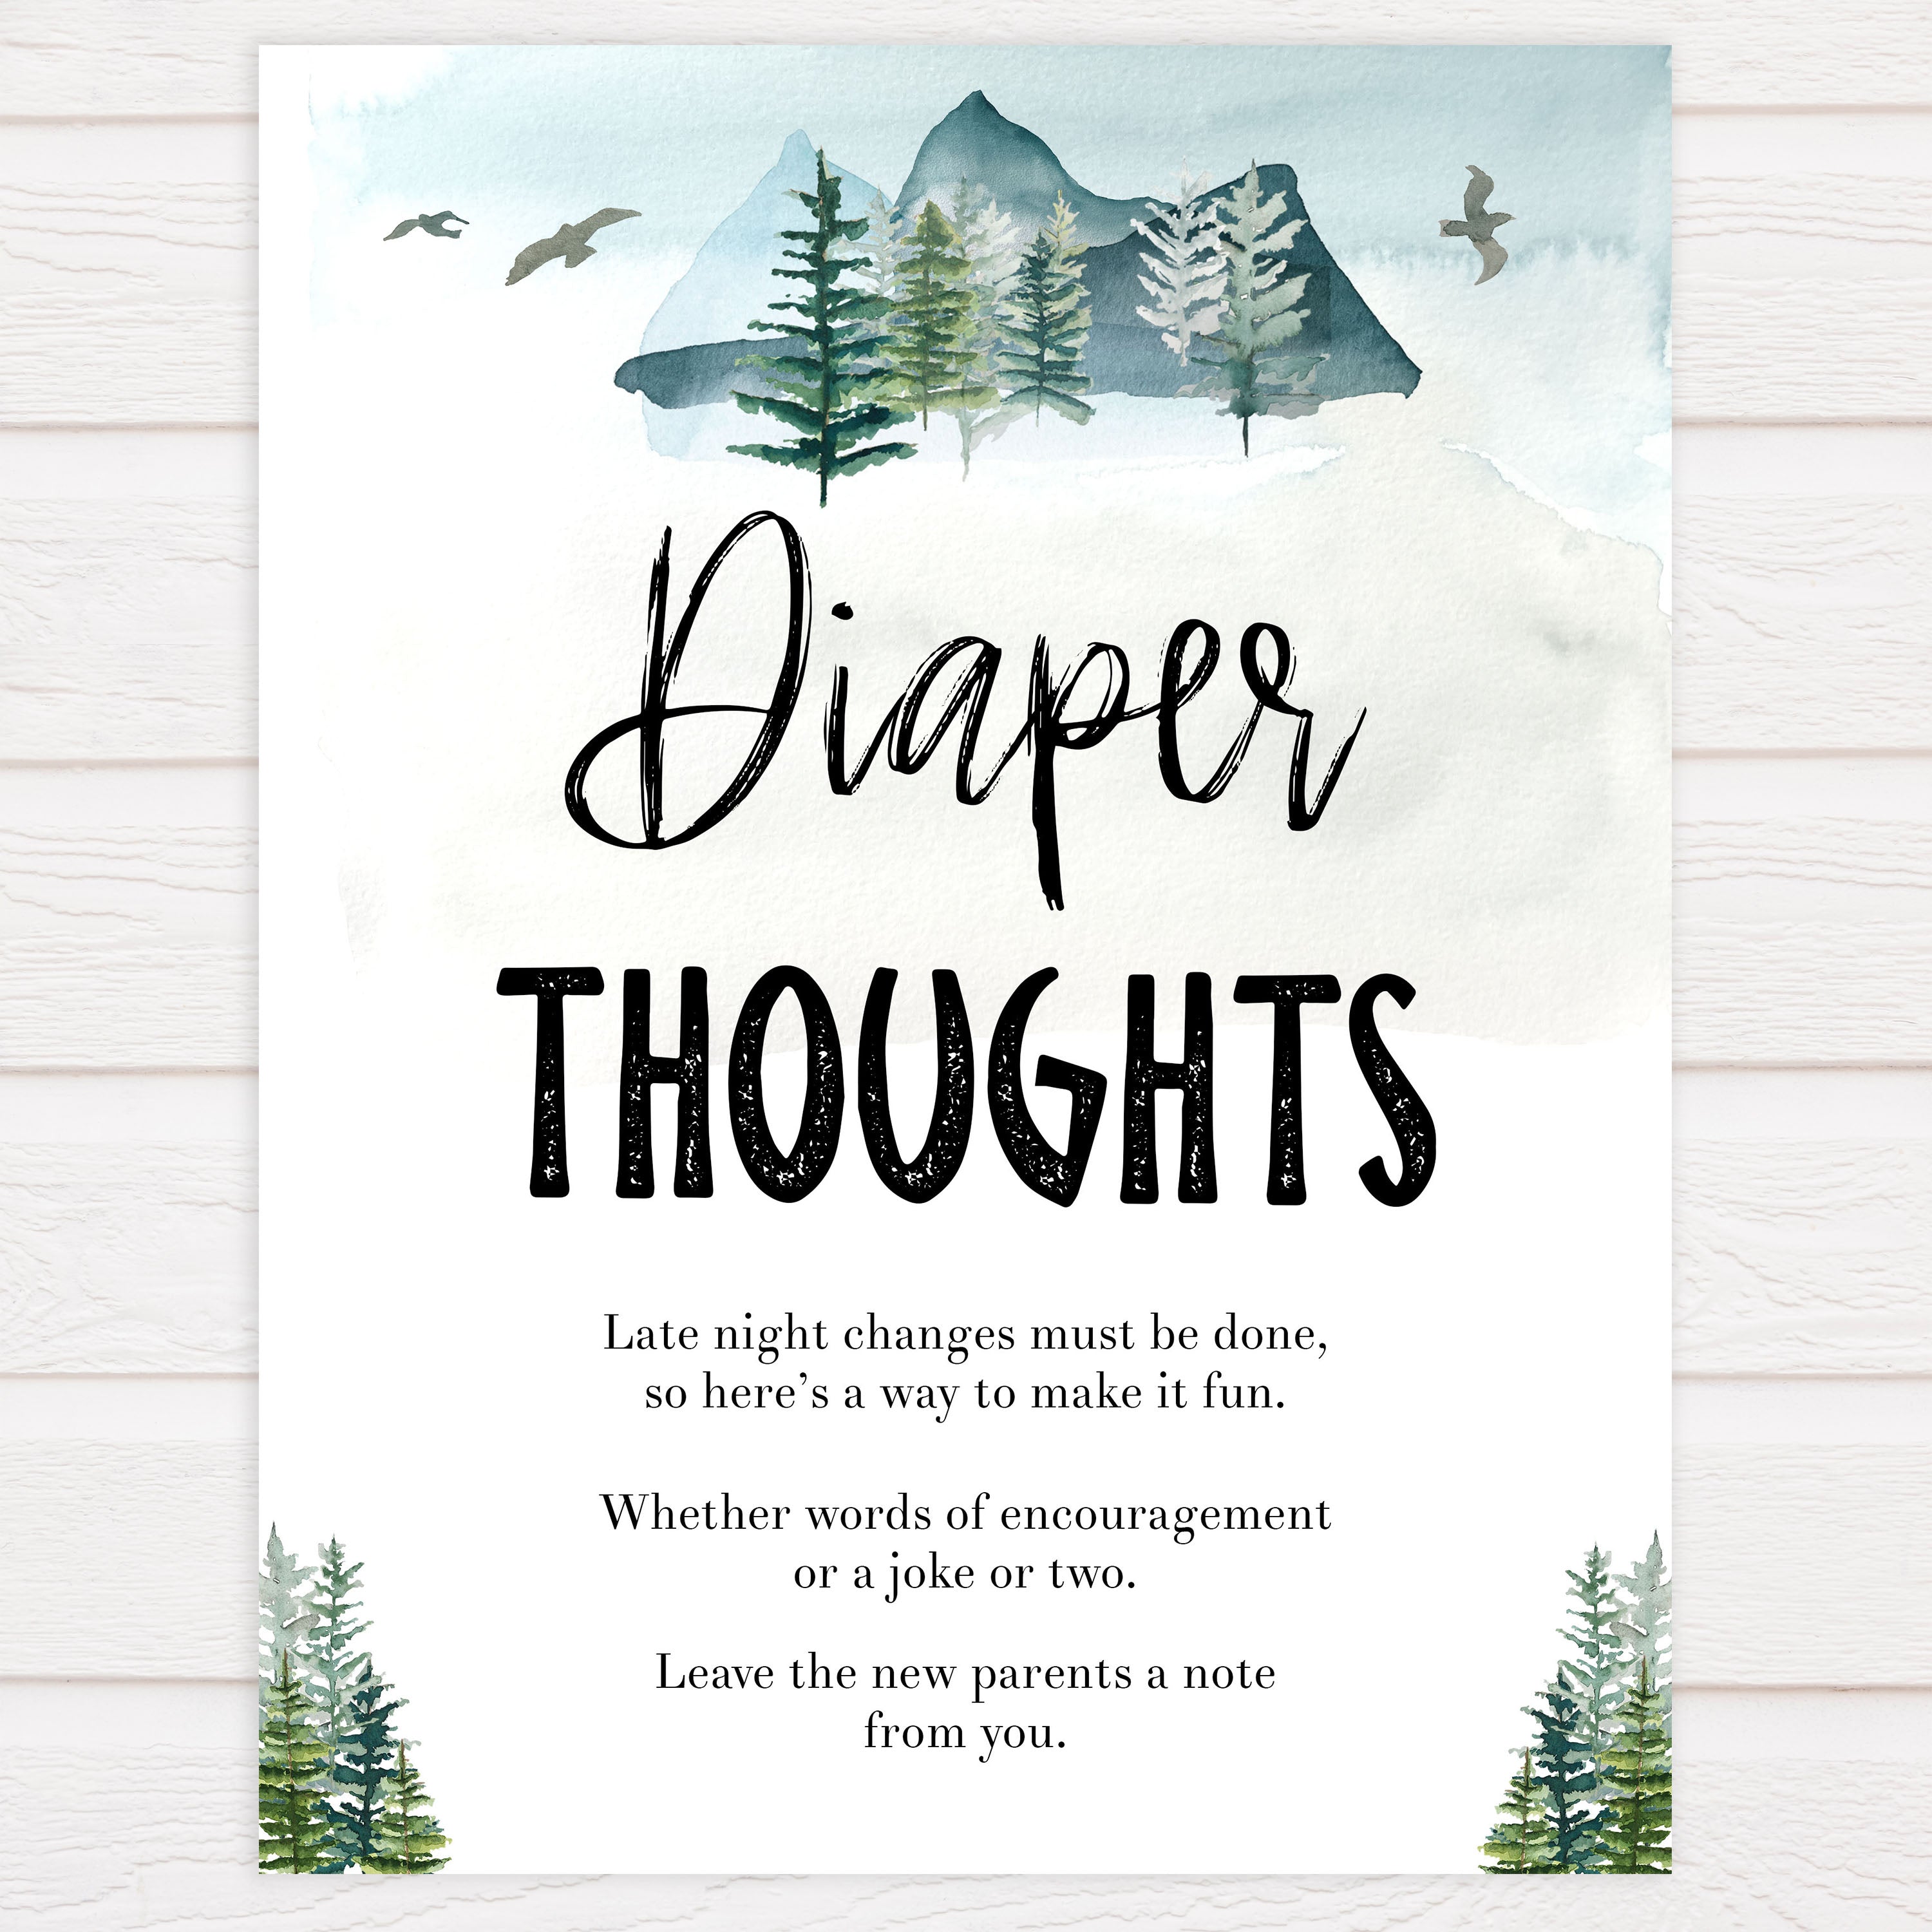 diaper thoughts baby shower, late night diapers, Printable baby shower games, adventure awaits baby games, baby shower games, fun baby shower ideas, top baby shower ideas, adventure awaits baby shower, baby shower games, fun adventure baby shower ideas